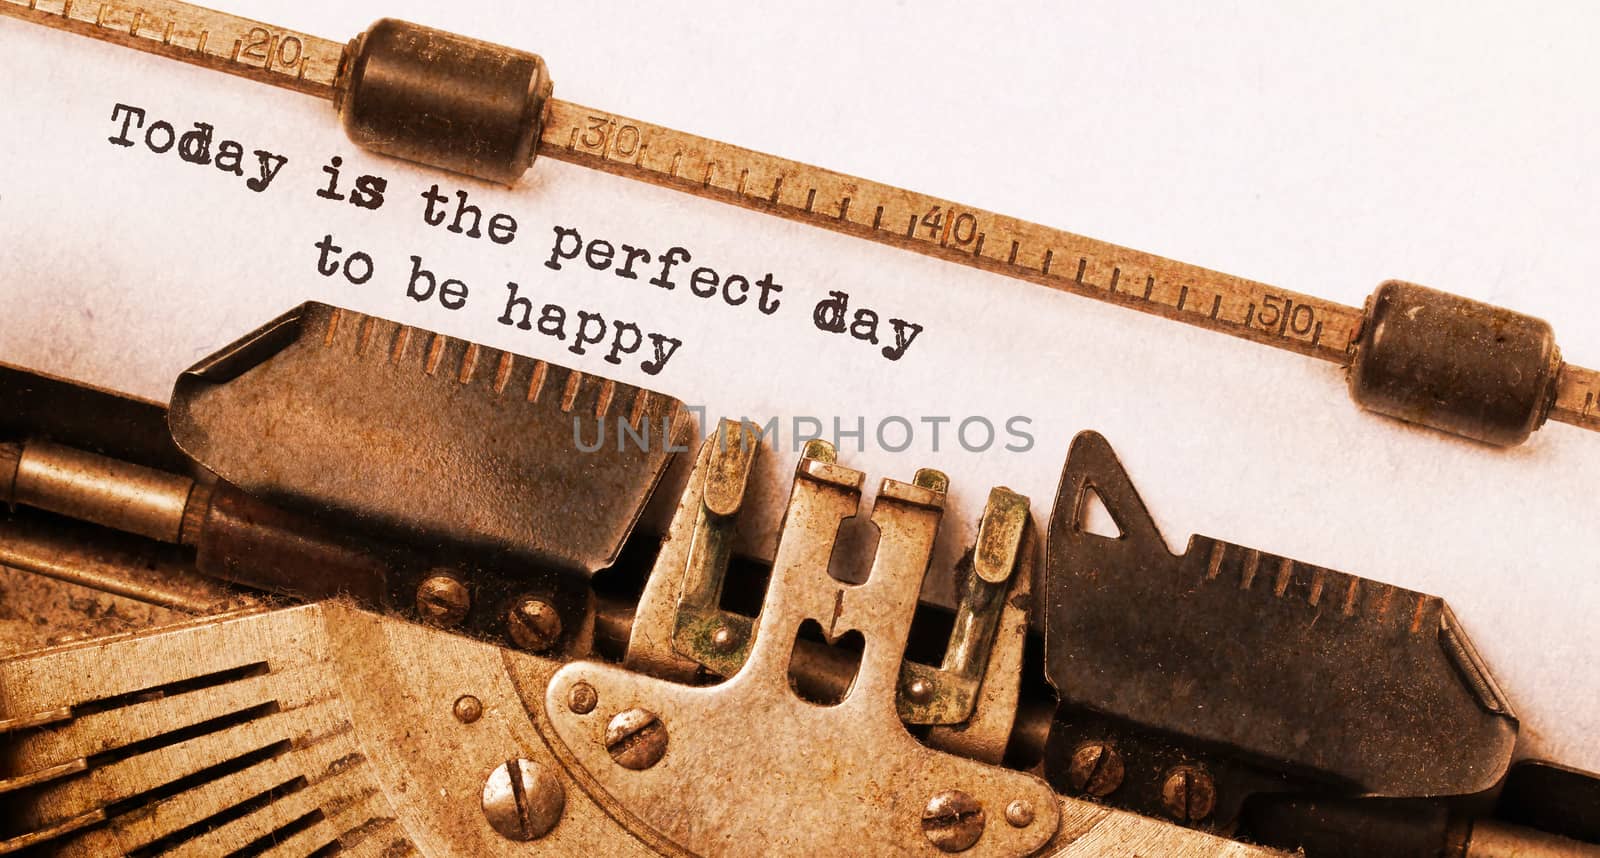 Today is the perfect day to be happy, written on an old typewriter, vintage